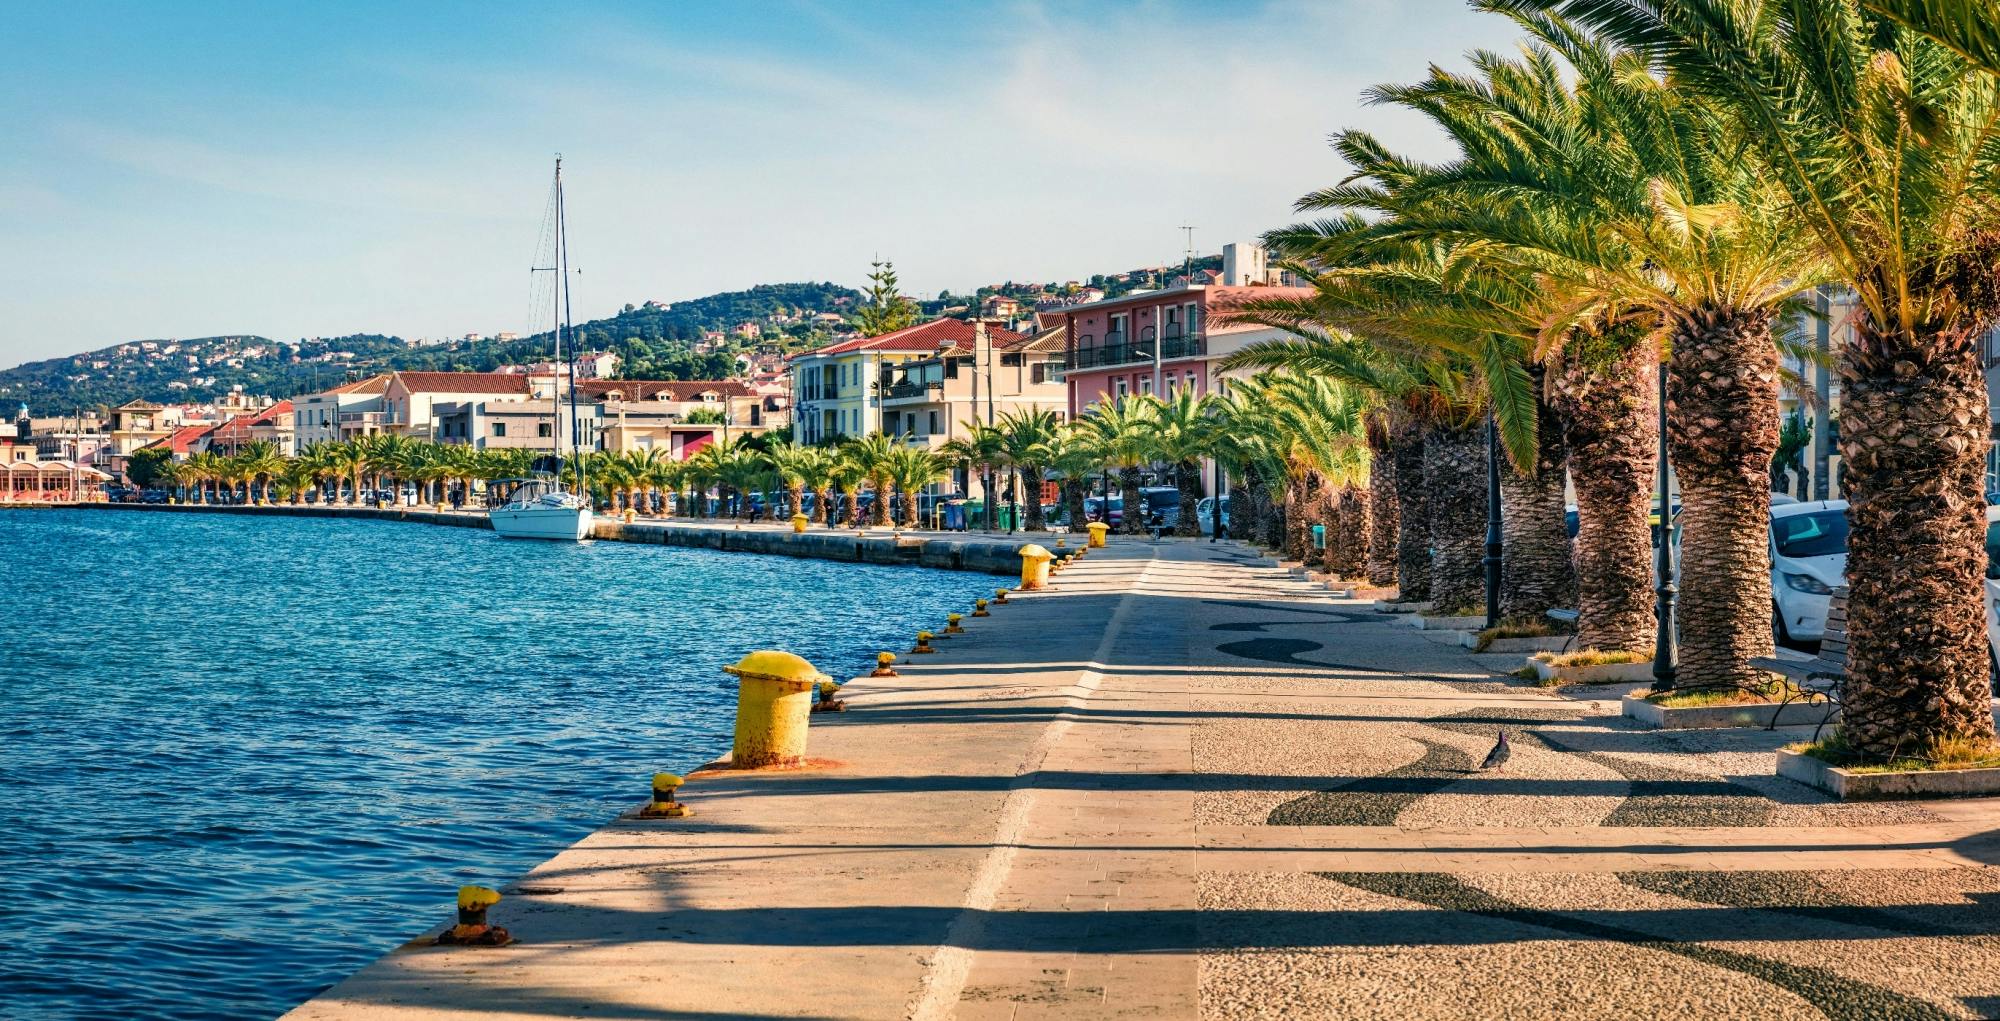 Kefalonia highlights guided tour from Zakynthos